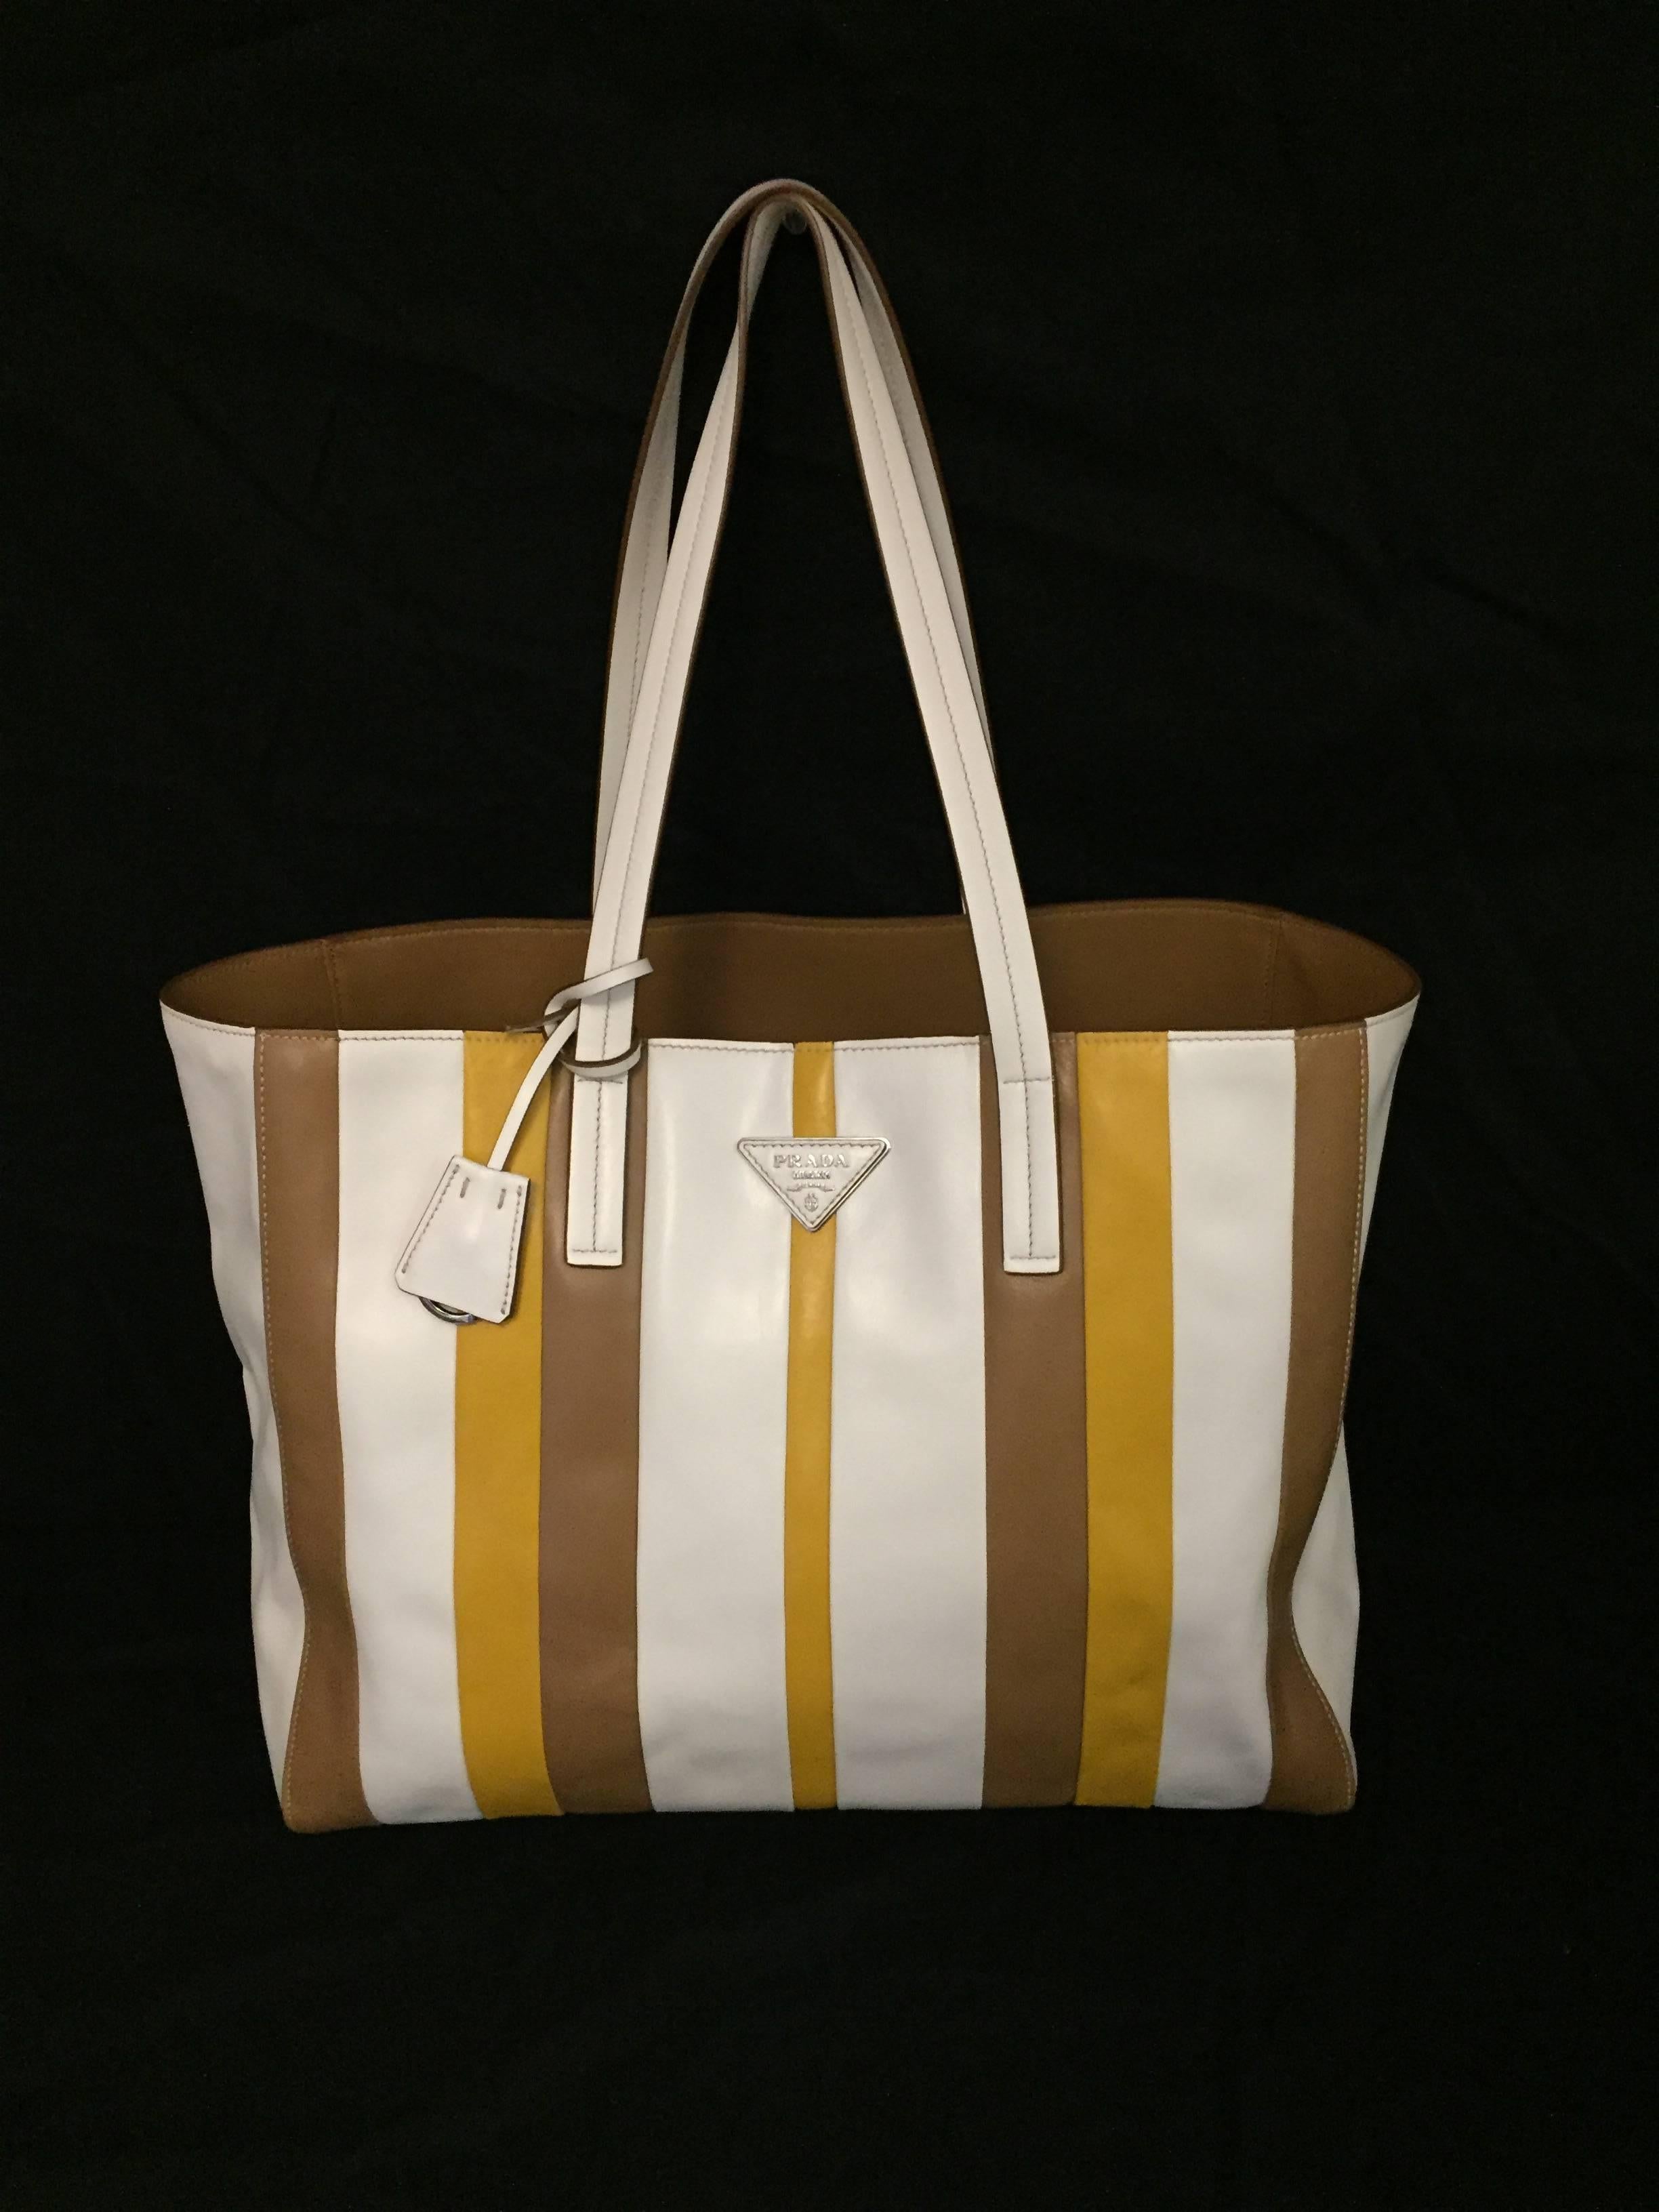 This Prada shopping tote is a must for Spring!  Features exquisite Calf Baiadera leather, flat handles, and open top.  Sophisticated, alternating white, caramel and dijon strips on front and back illustrate elevated Italian craftsmanship.  Interior